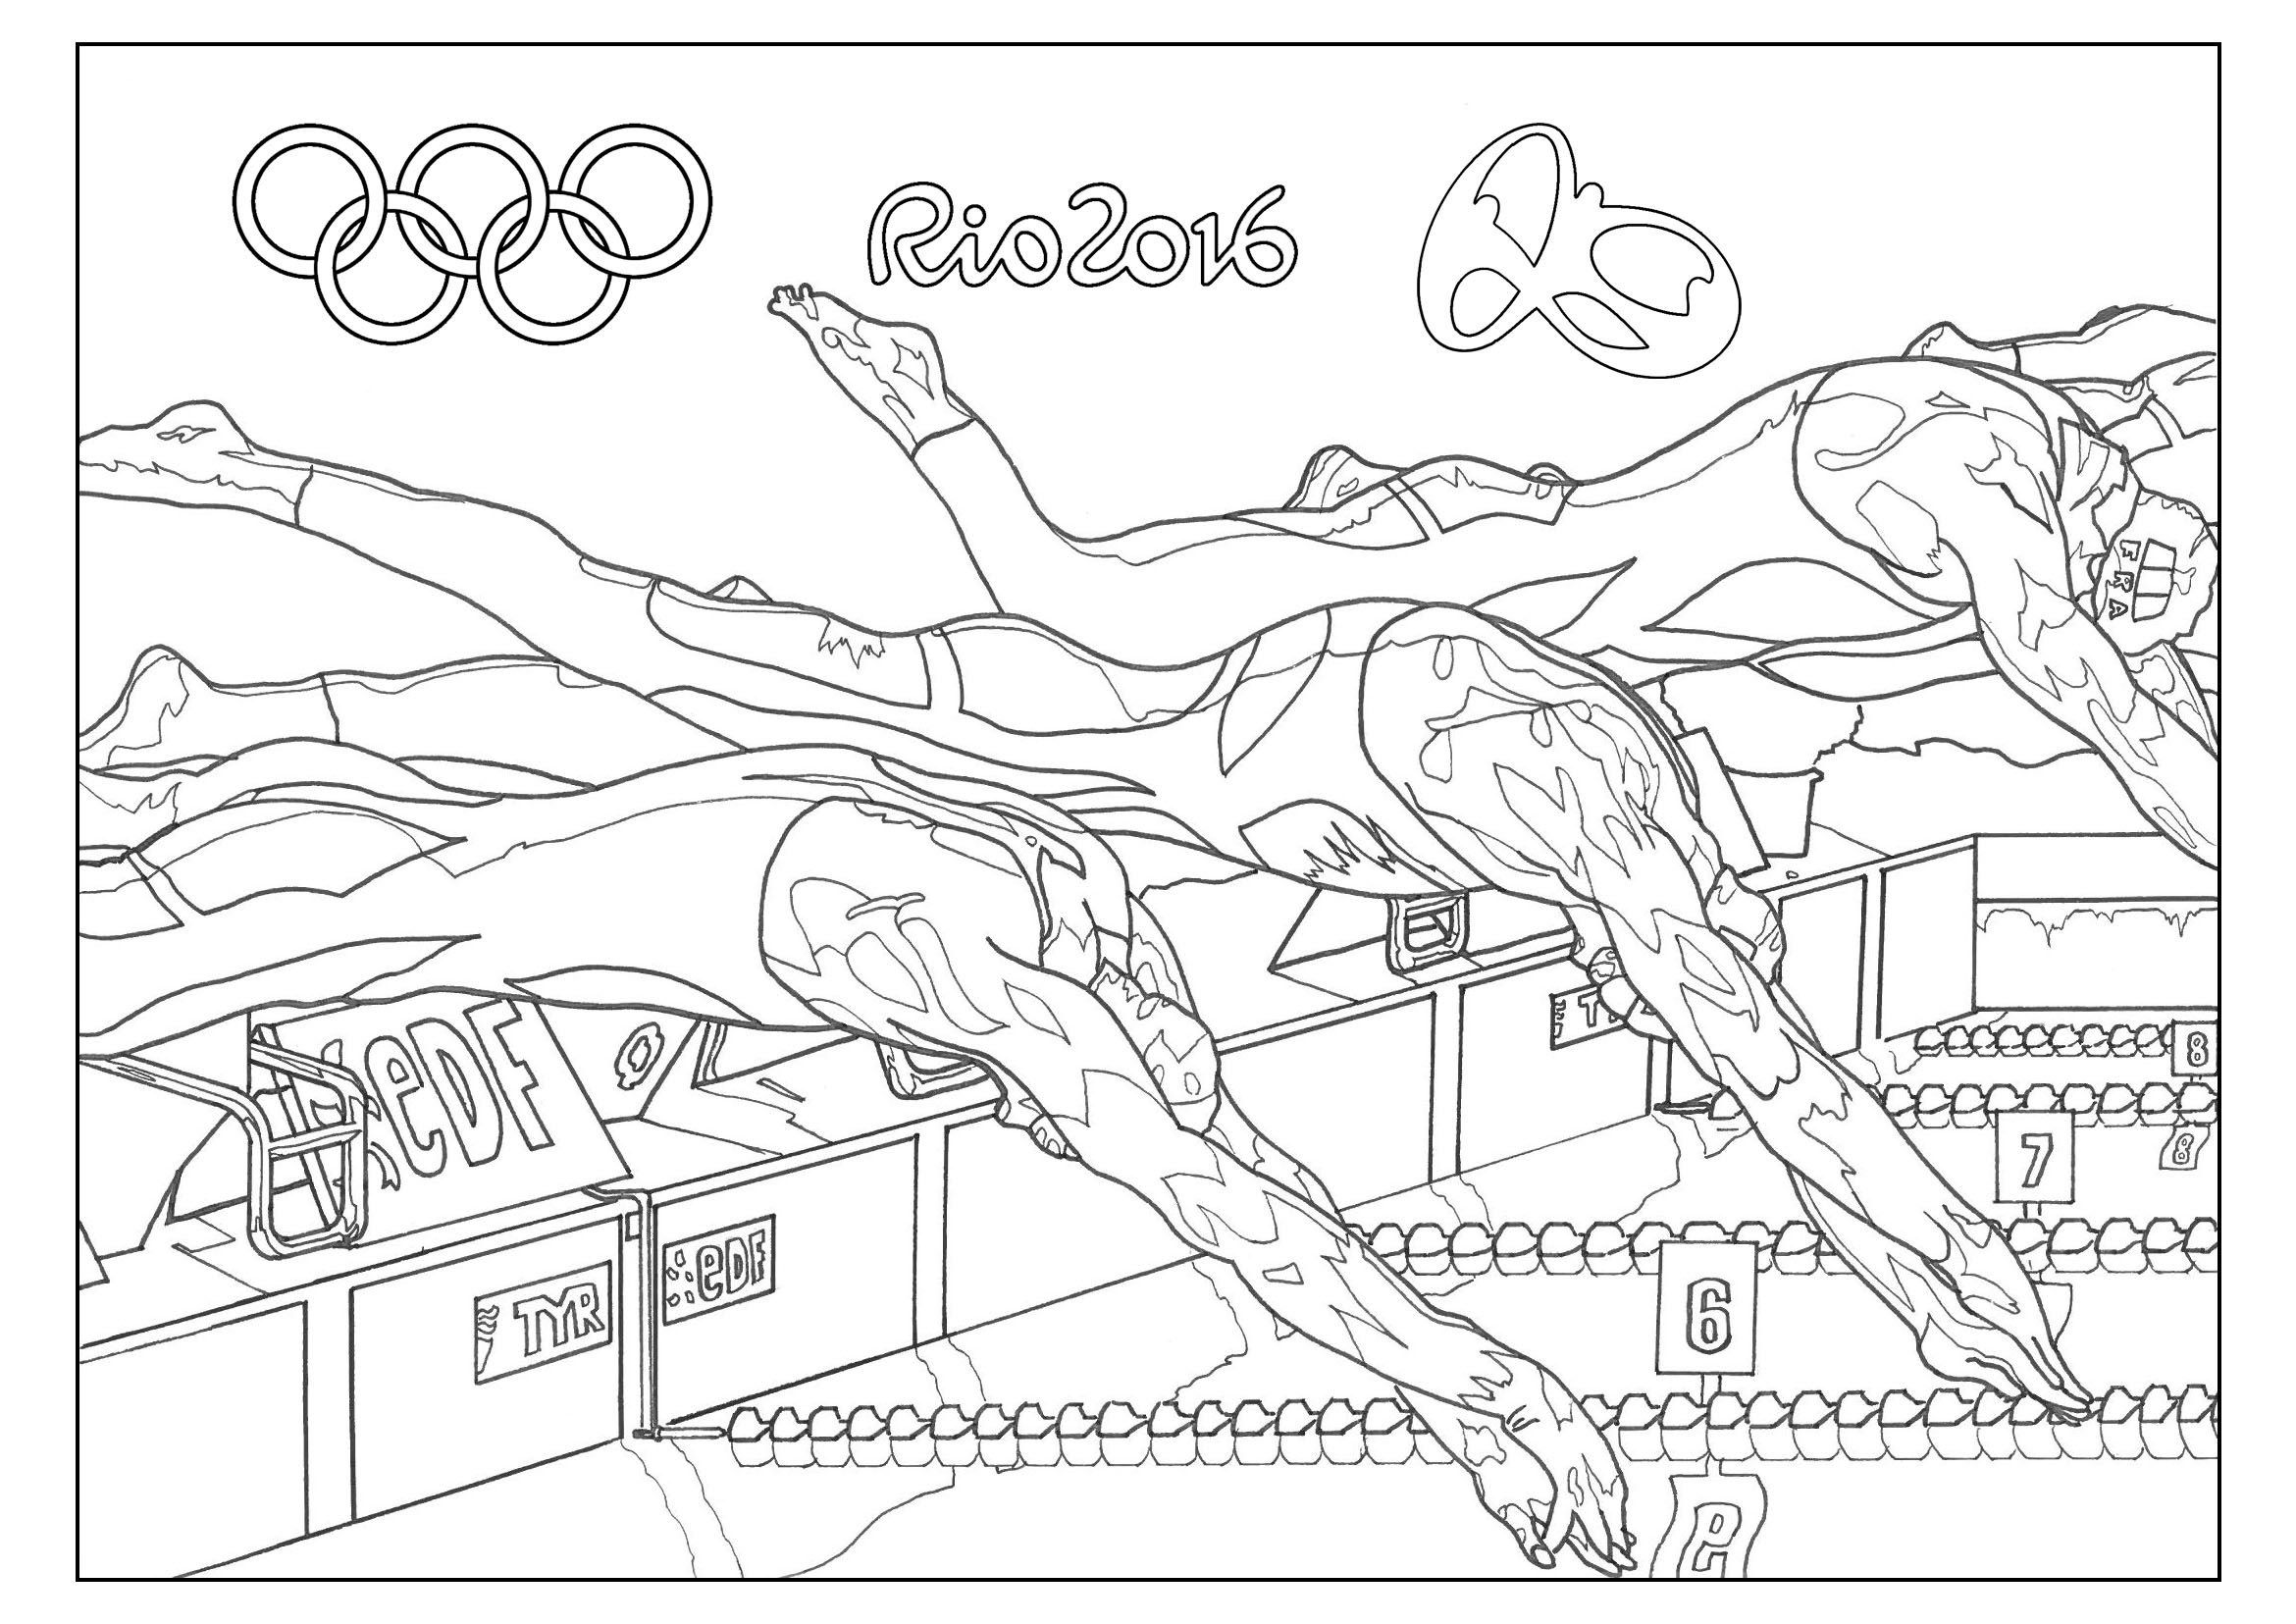 Colouring Rio 2016 Olympic Games: Swimming